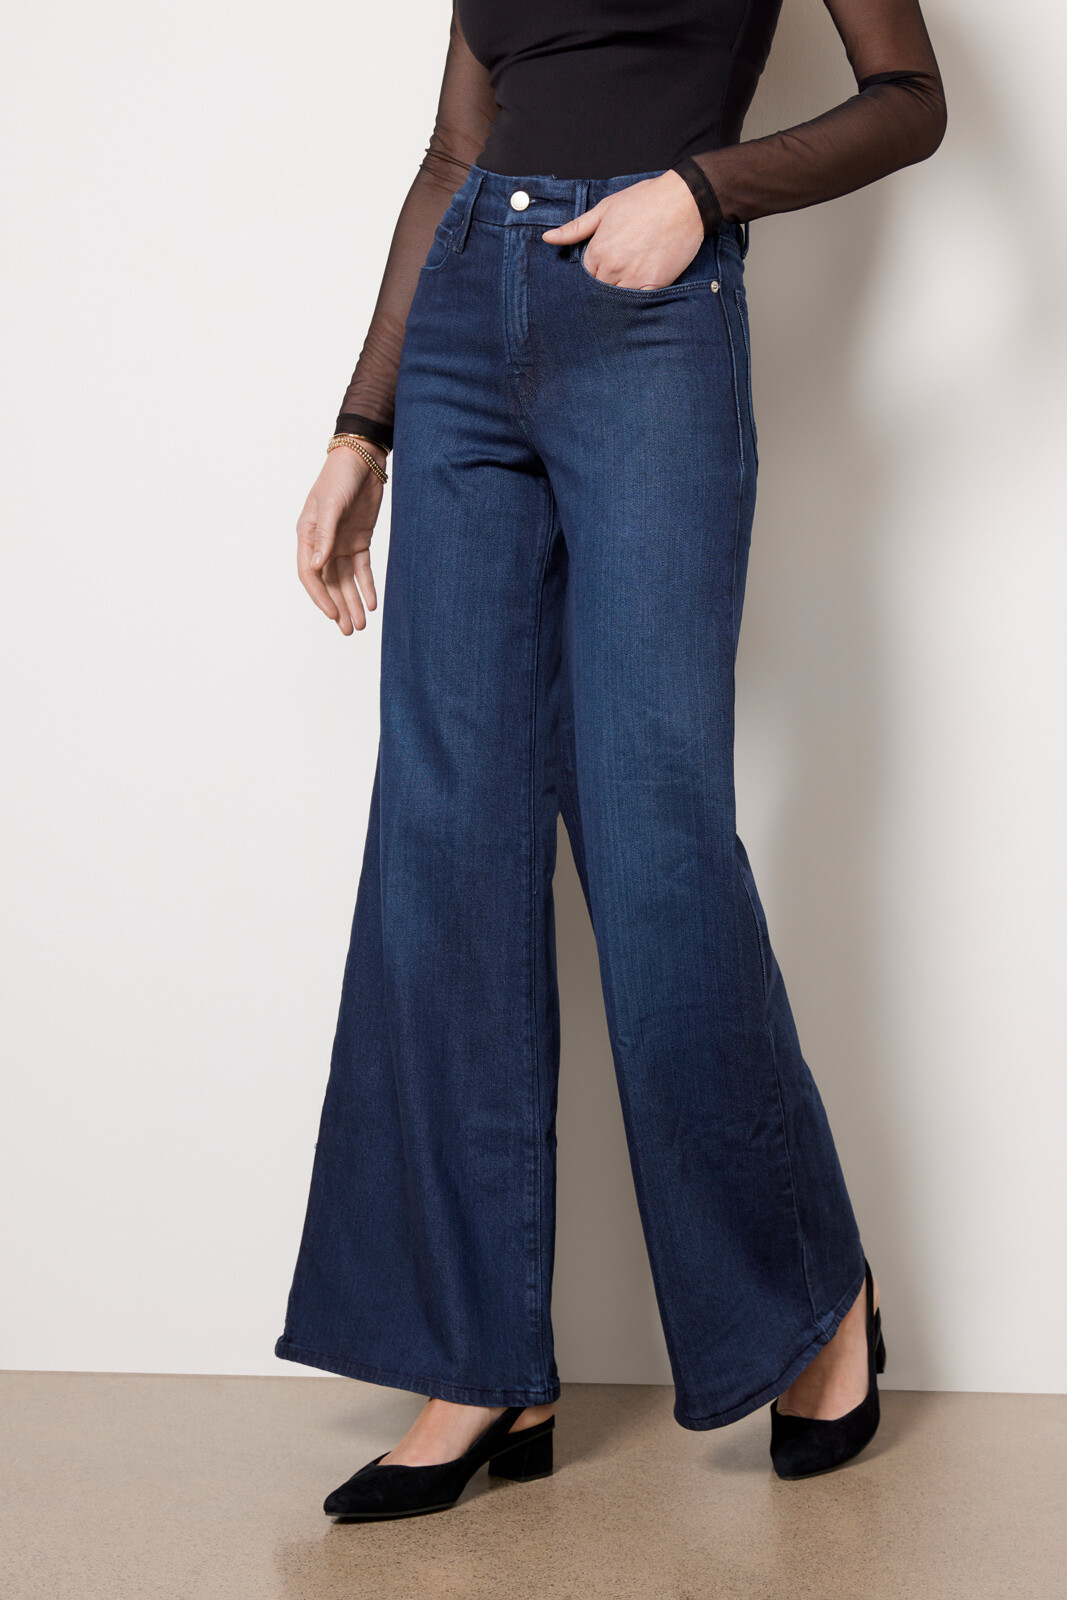 Free Returns ✓ Free Shipping On Orders $49+ ✓. SHEIN BASICS High Waist Palazzo  Pants- Jeans at SHEI… | Wide leg jeans outfit, Wide leg outfit, Wide leg  pants outfit